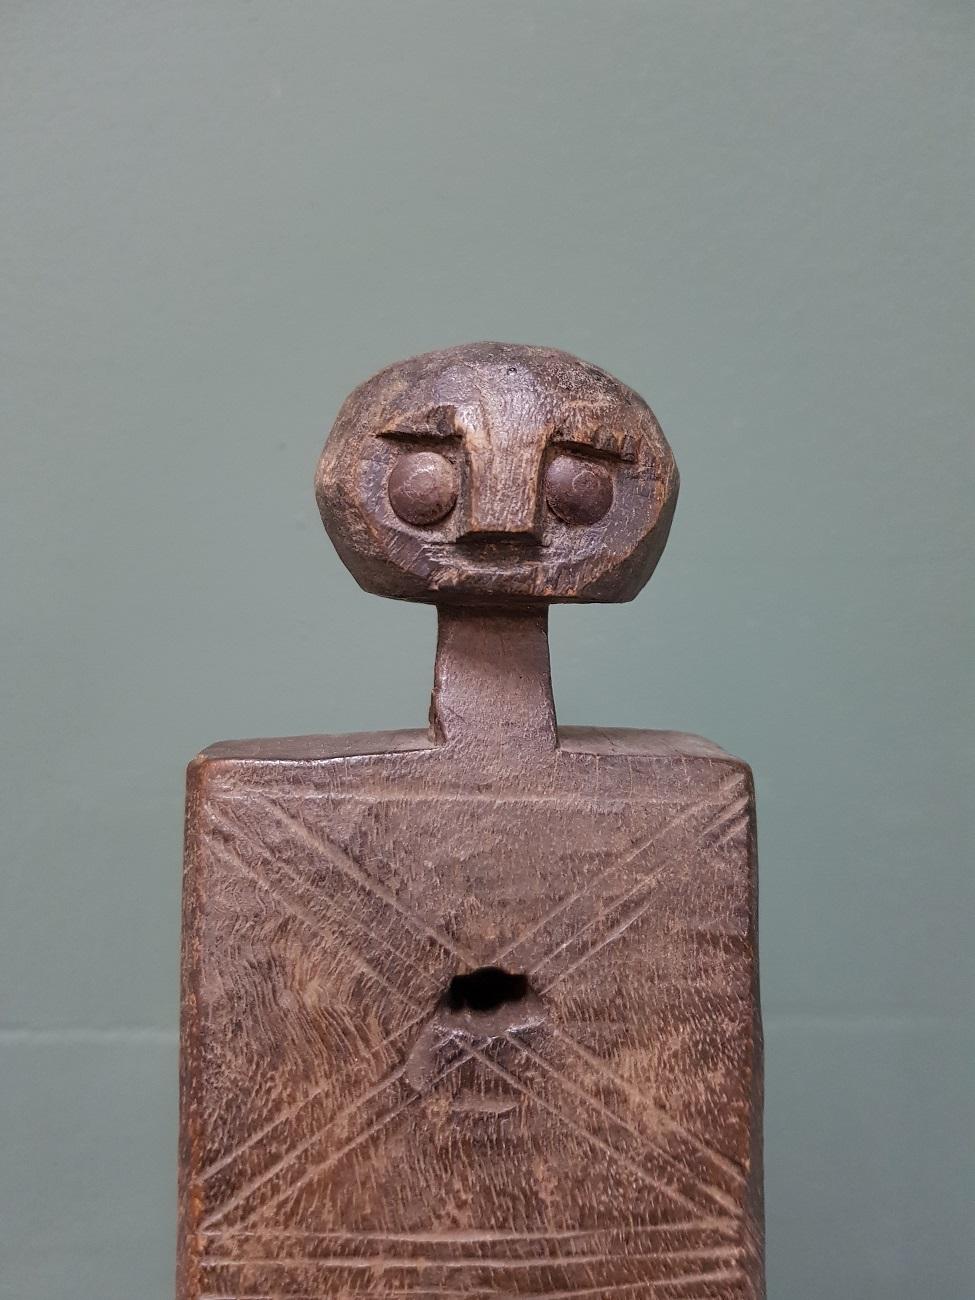 African carved figurative door lock of the Dogon or Bambara Tribe Mali and in good condition with a beautiful patina, first half of the 20th century.

The measurements are:
Depth 7 cm/ 2.7 inch.
Width 10 cm/ 3.9 inch.
Height 31 cm/ 12.2 inch.